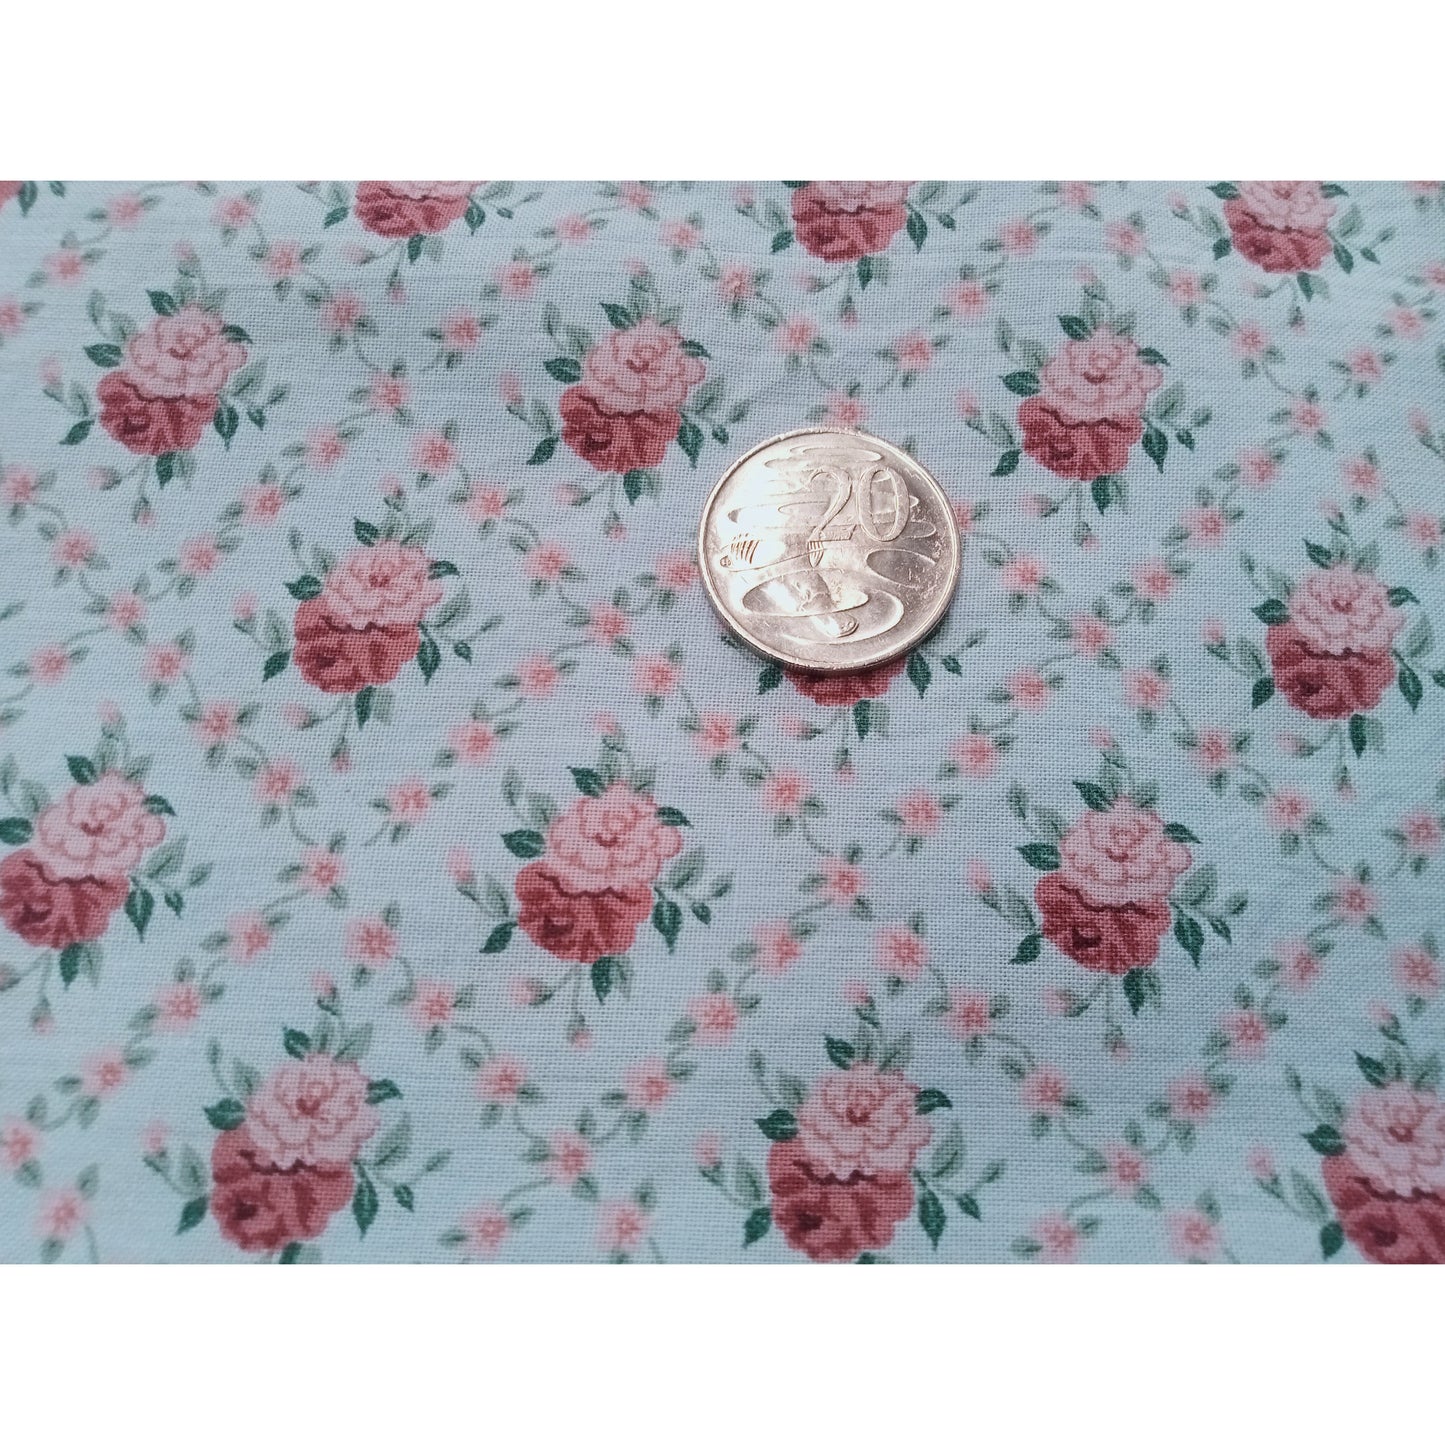 Strawberries & cream - floral printed cotton fabric - sold by 1/2mtr